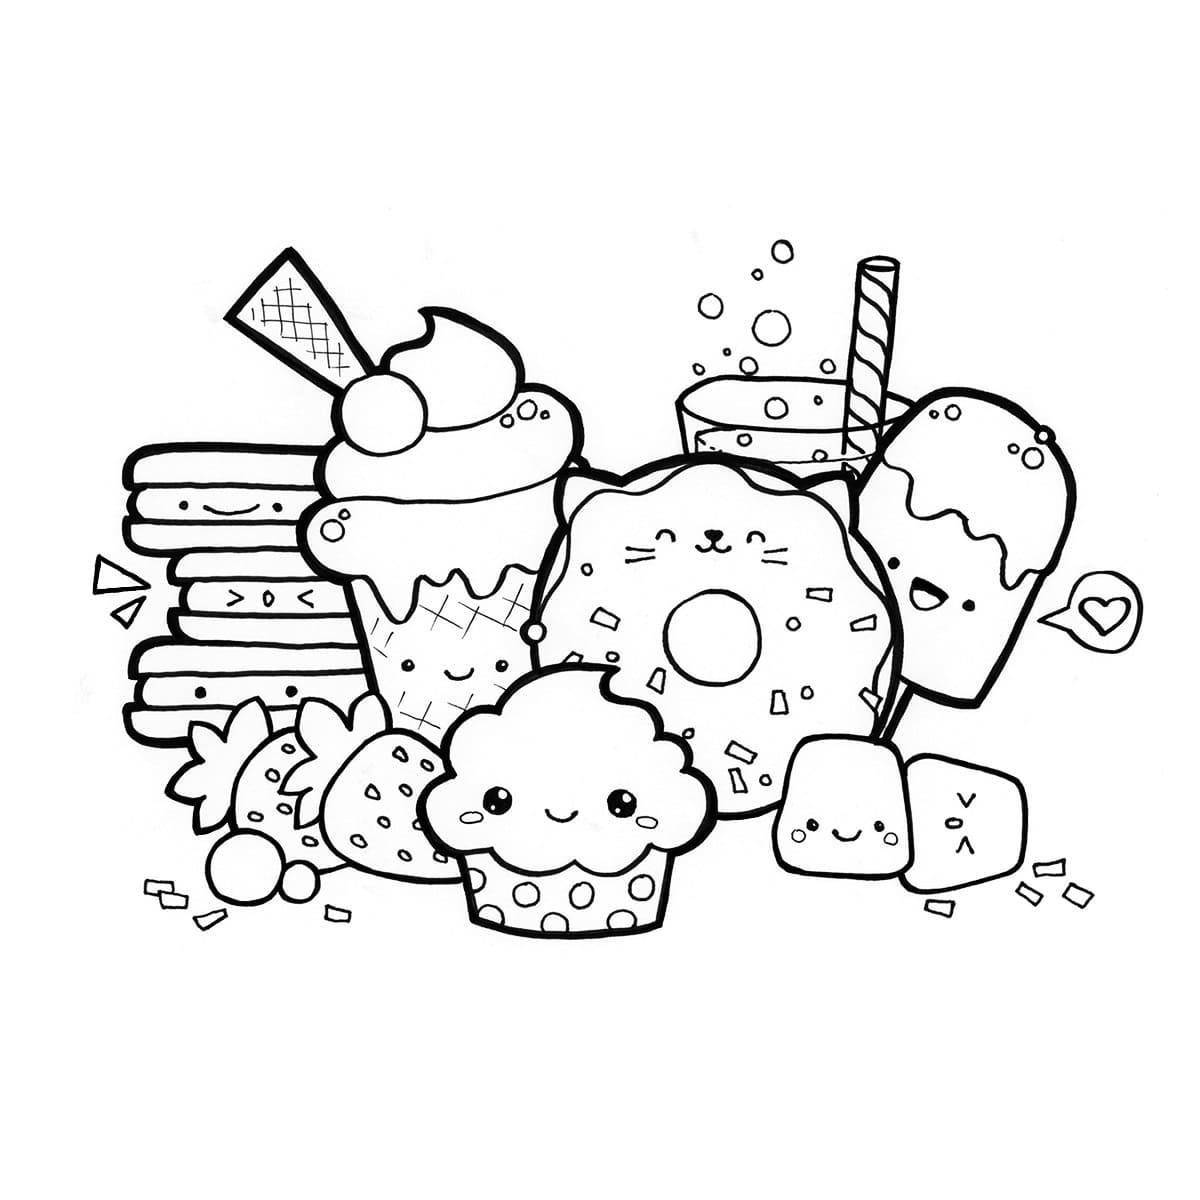 Attractive squishy food coloring page